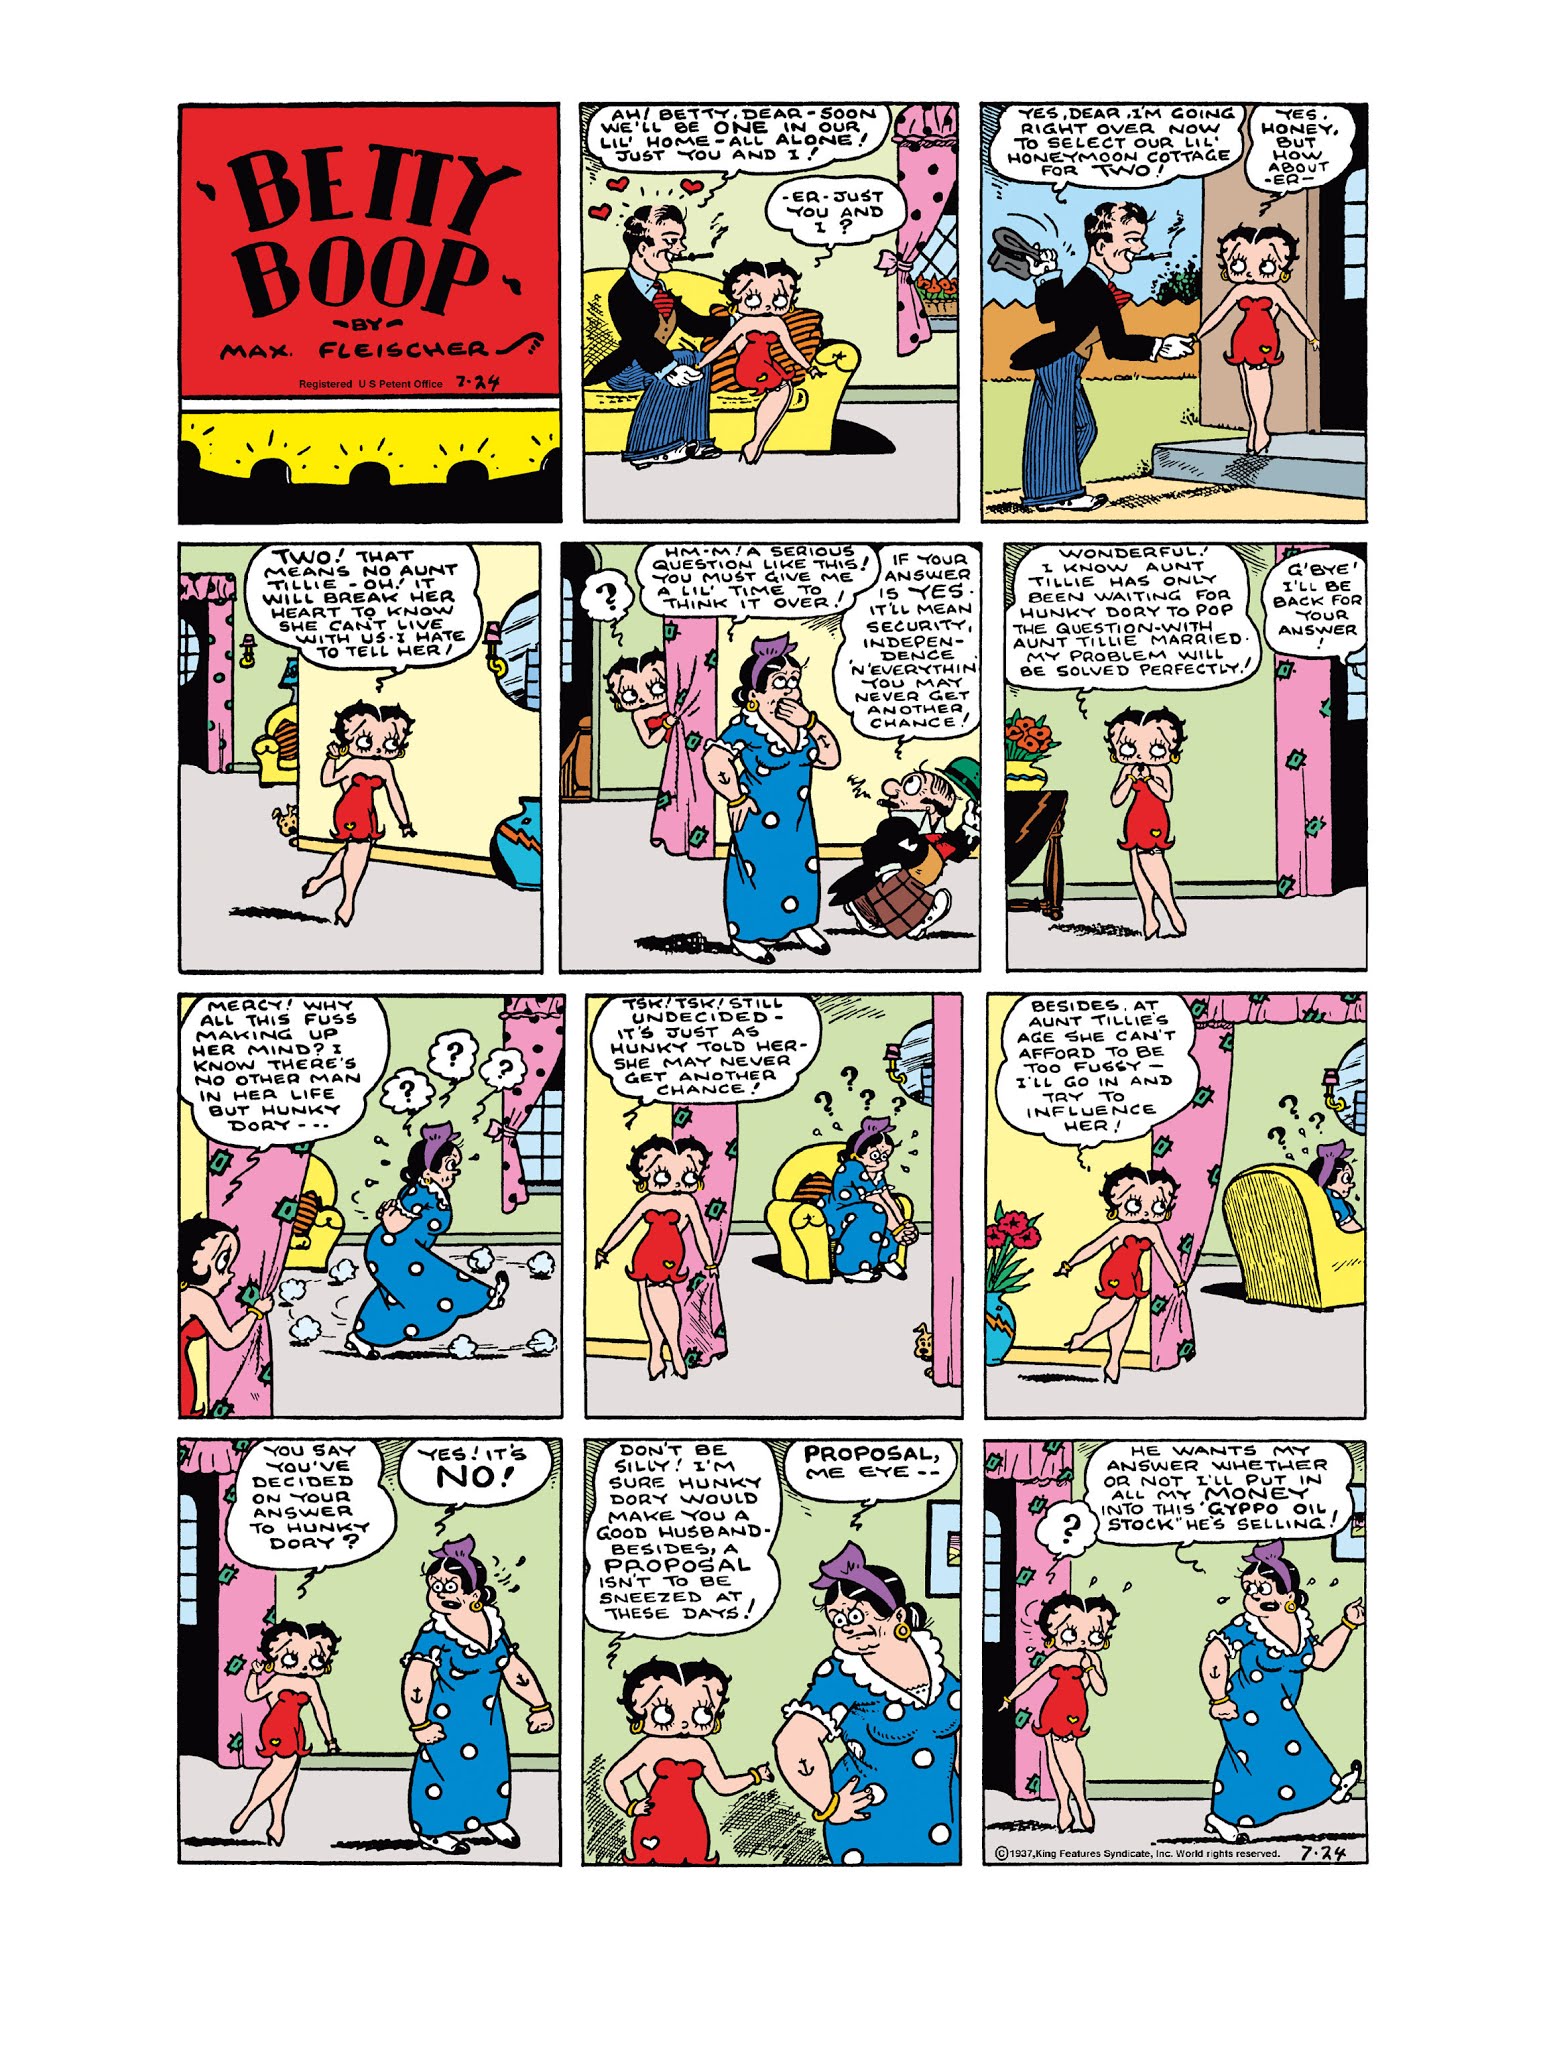 Read online The Definitive Betty Boop comic -  Issue # TPB - 160